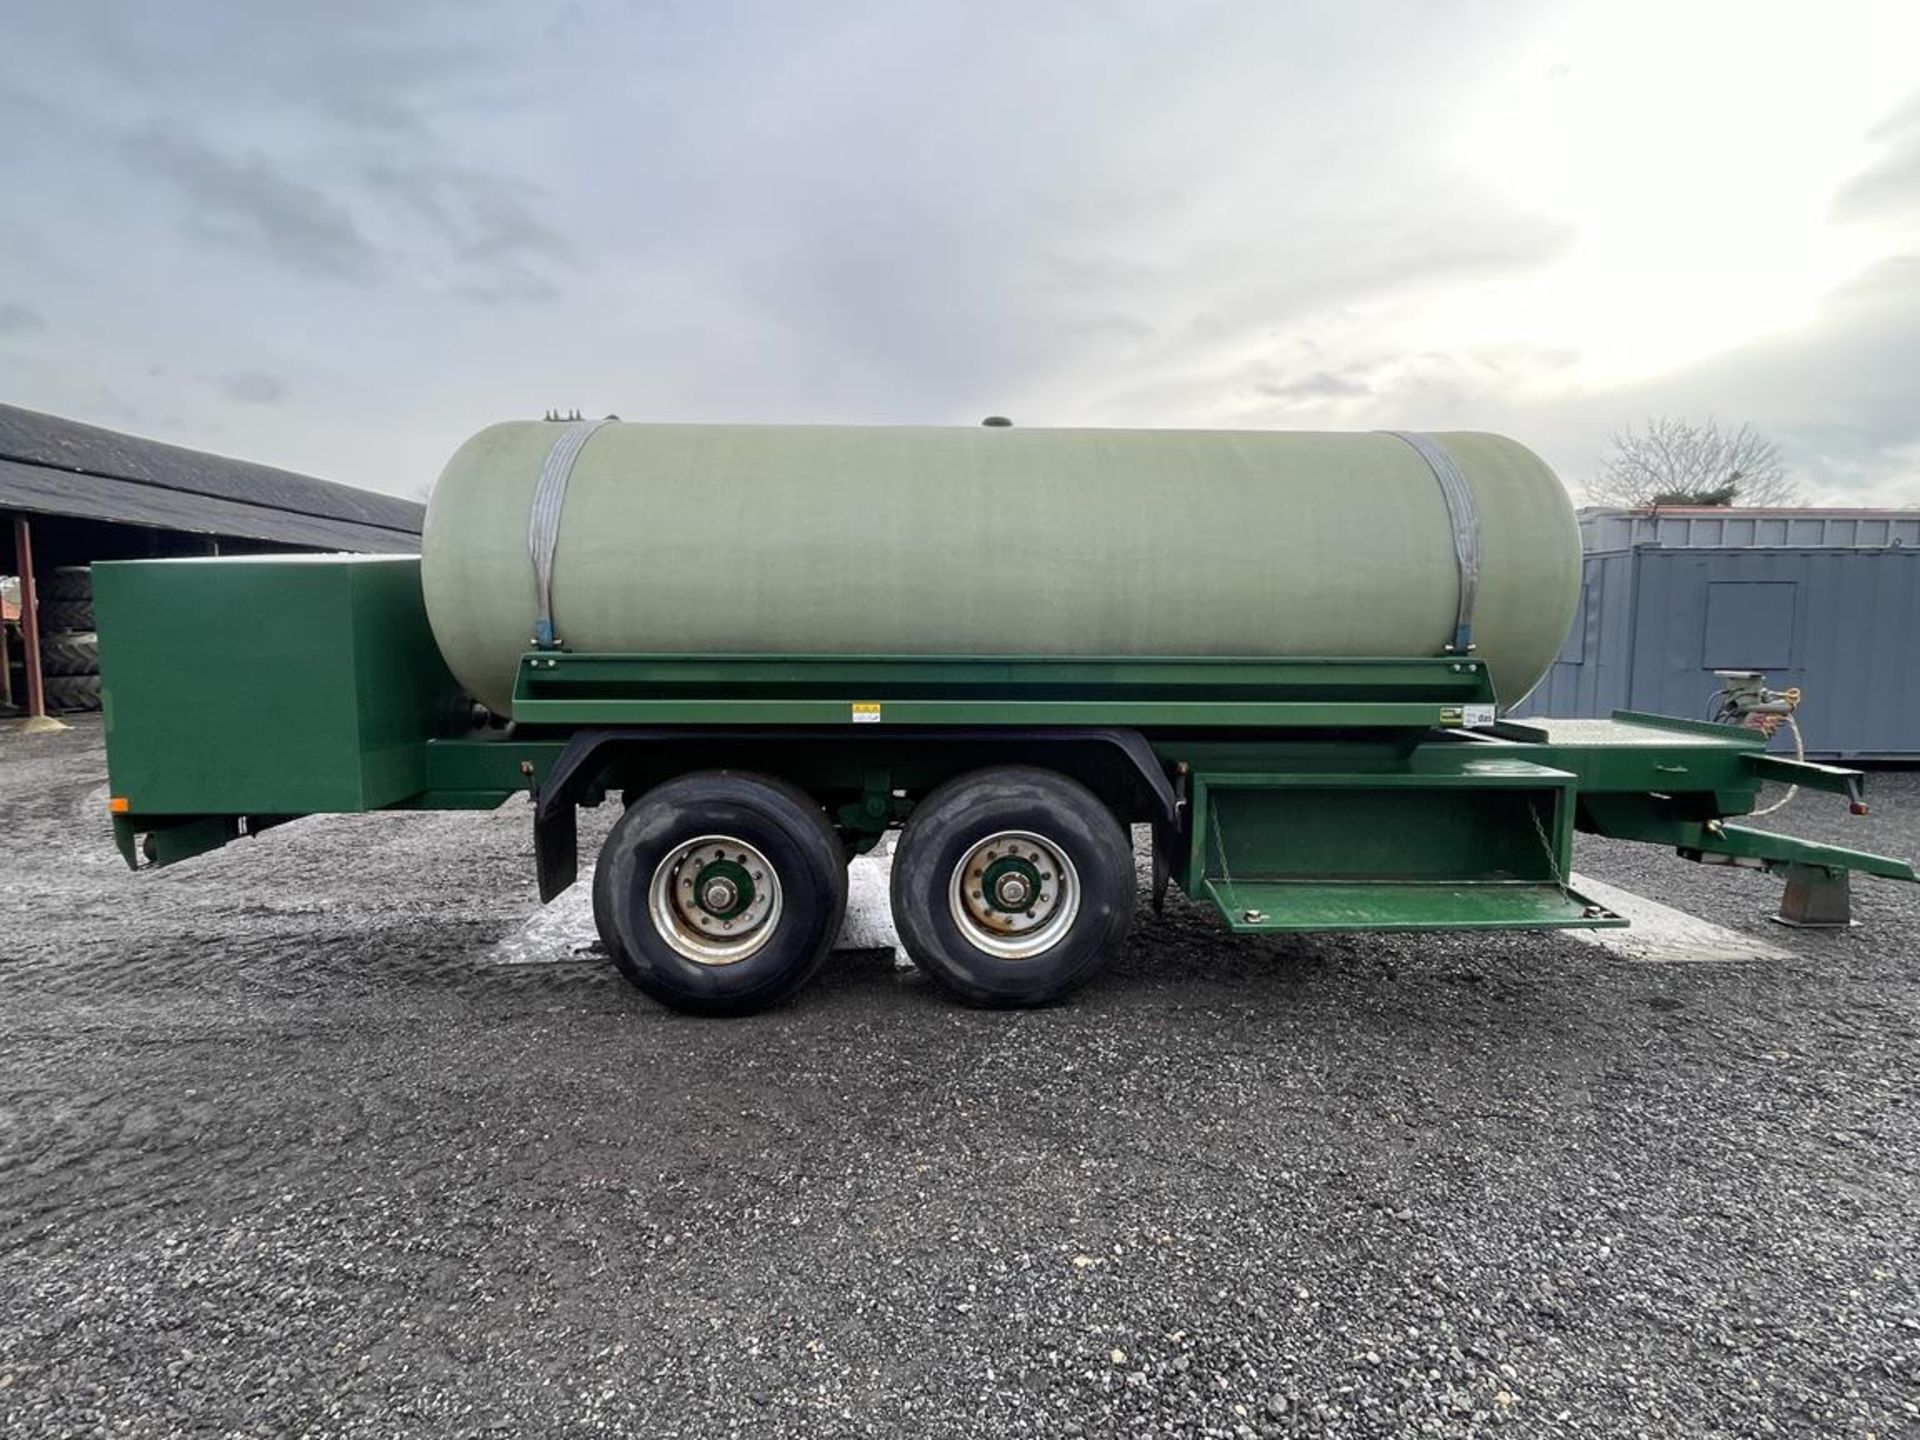 2018 Bailey 15,000 Litre Water Bowser Double Axle Fibreglass Trailer S/No. 1702316, Commercial - Image 5 of 10